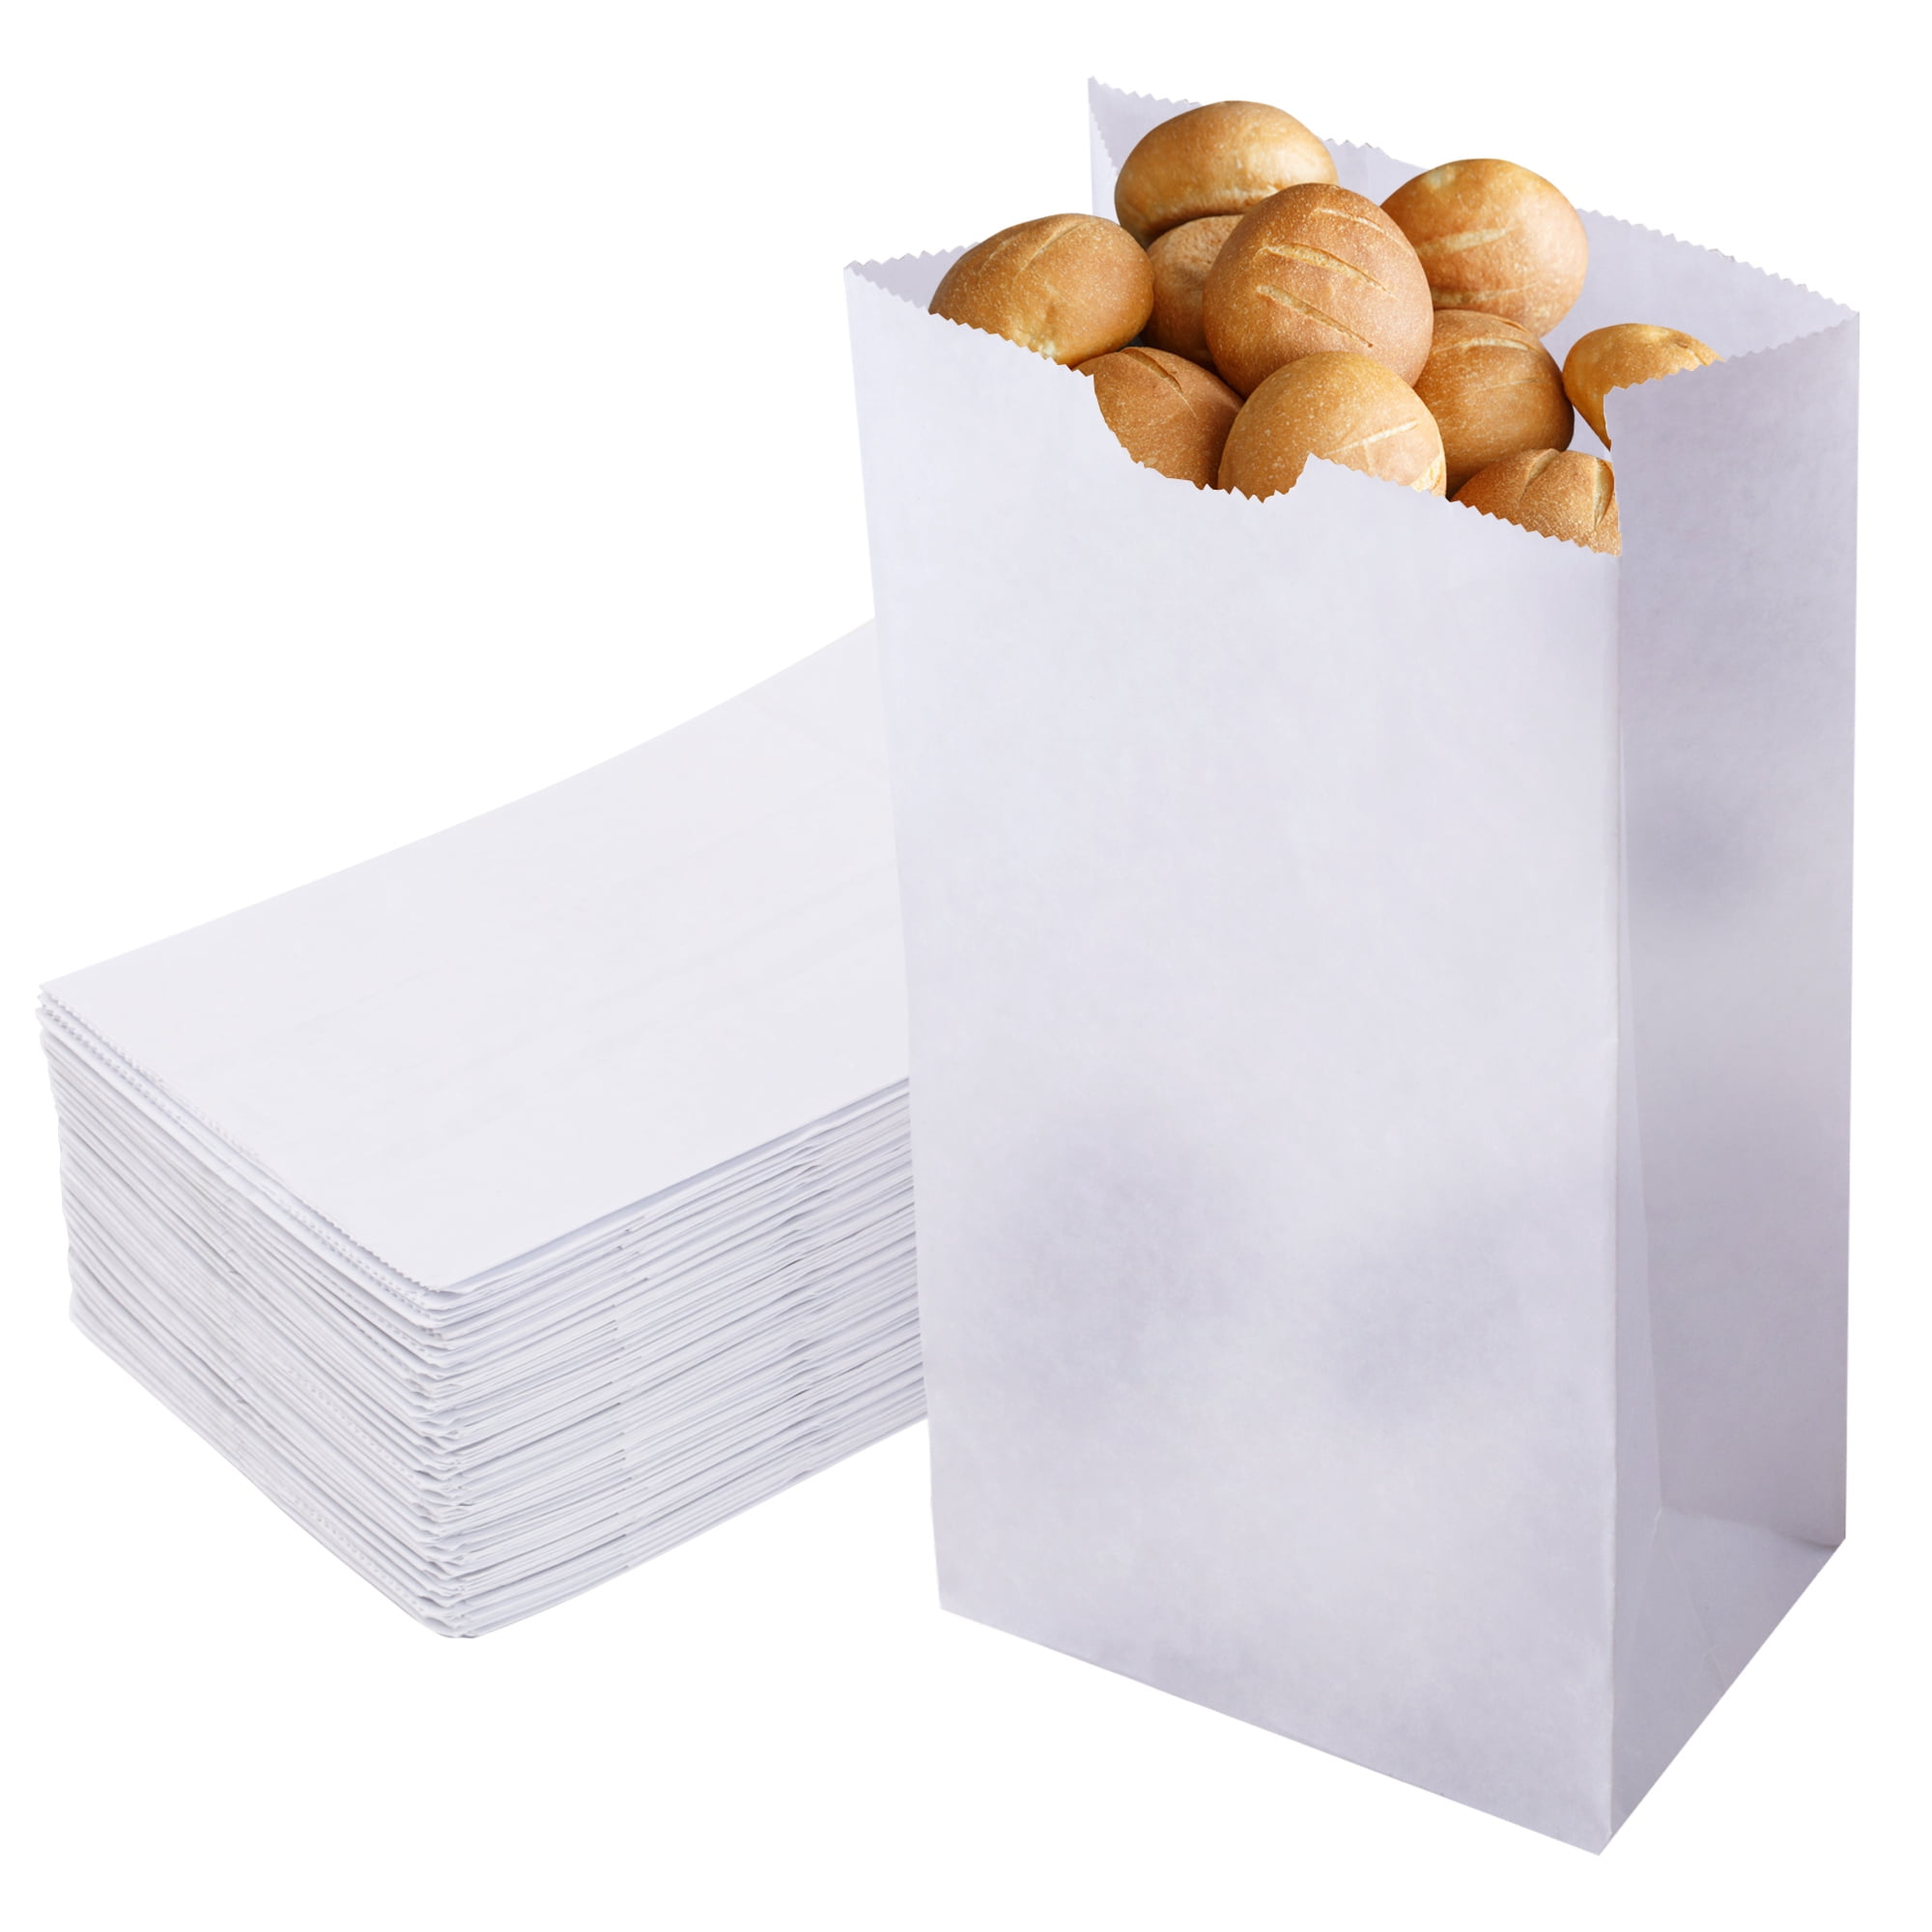 White Kraft Paper Bakery Grocery Bags 4Lb #4 Medium Paper Lunch To Go Bag  500pcs